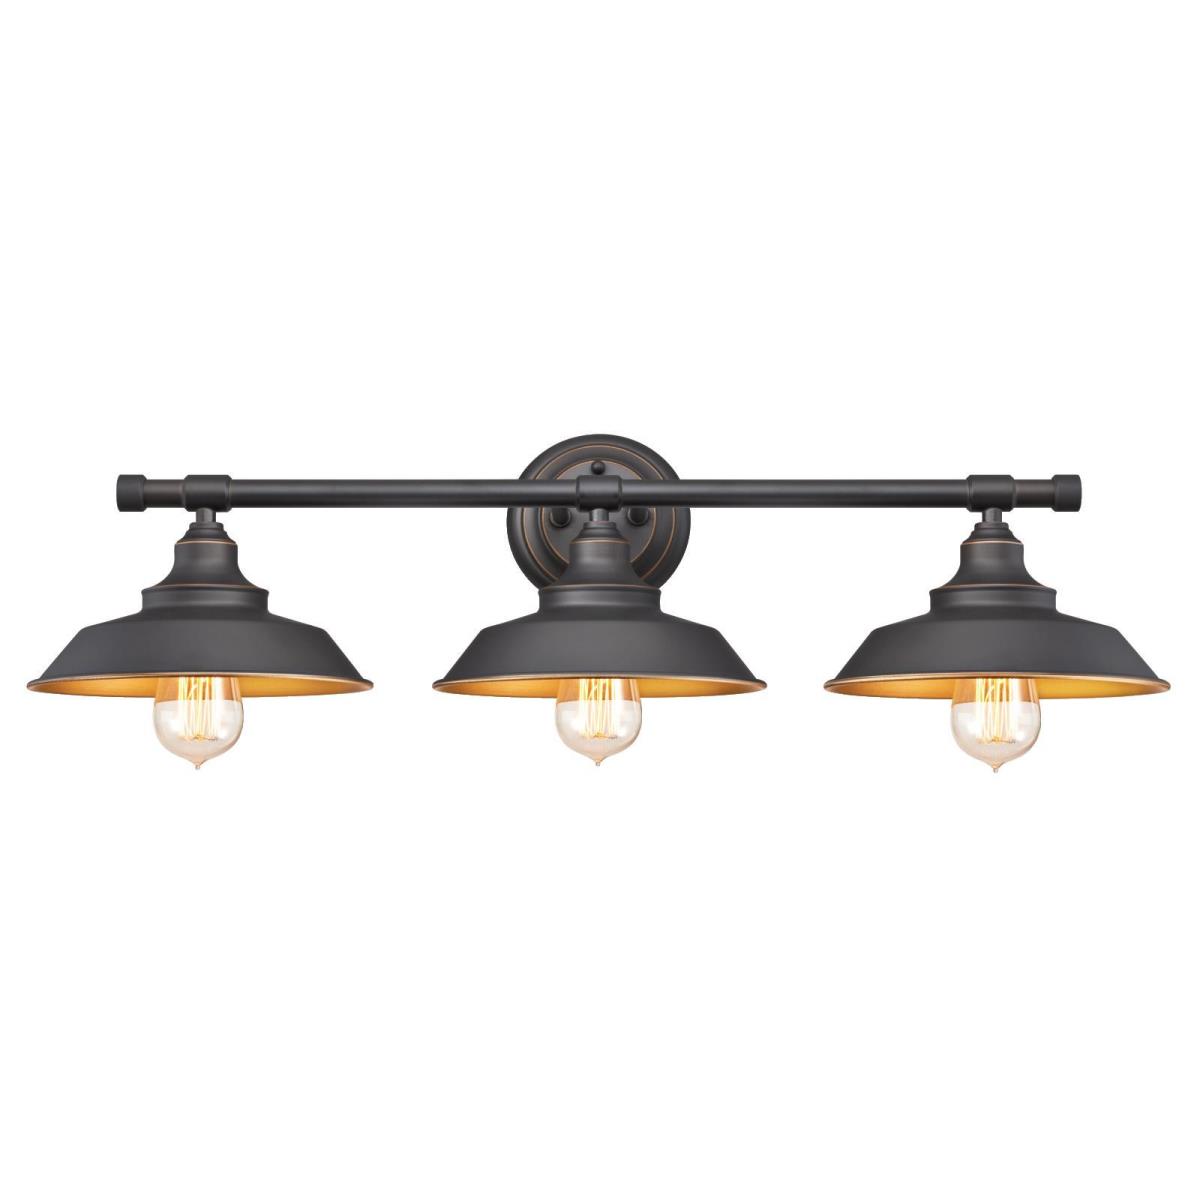 3 Light Wall Fixture Oil Rubbed Bronze Finish with Highlights and Metallic Bronze Interior